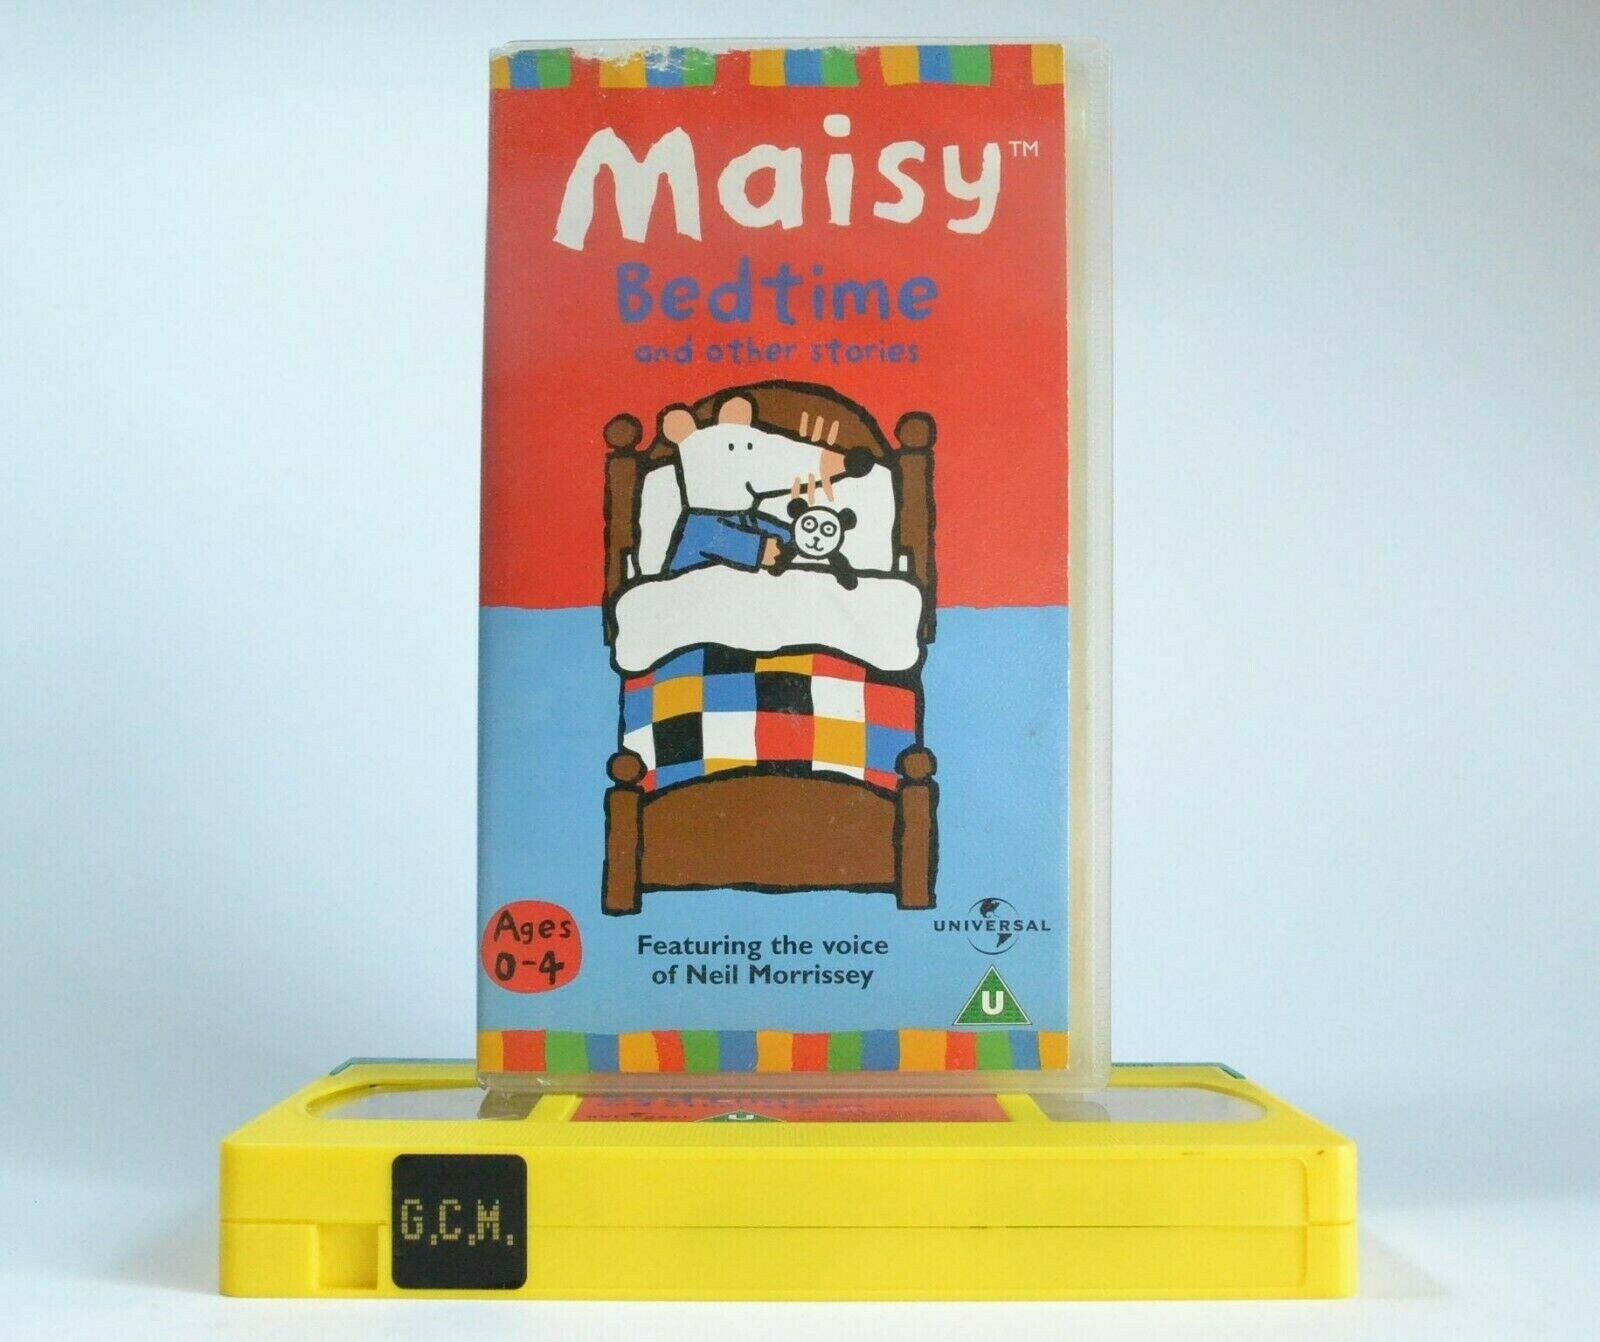 Maisy: Bedtime And Other Stories - Animated - Educational - Children's -  Pal VHS 0044005191035 – Golden Class Movies LTD